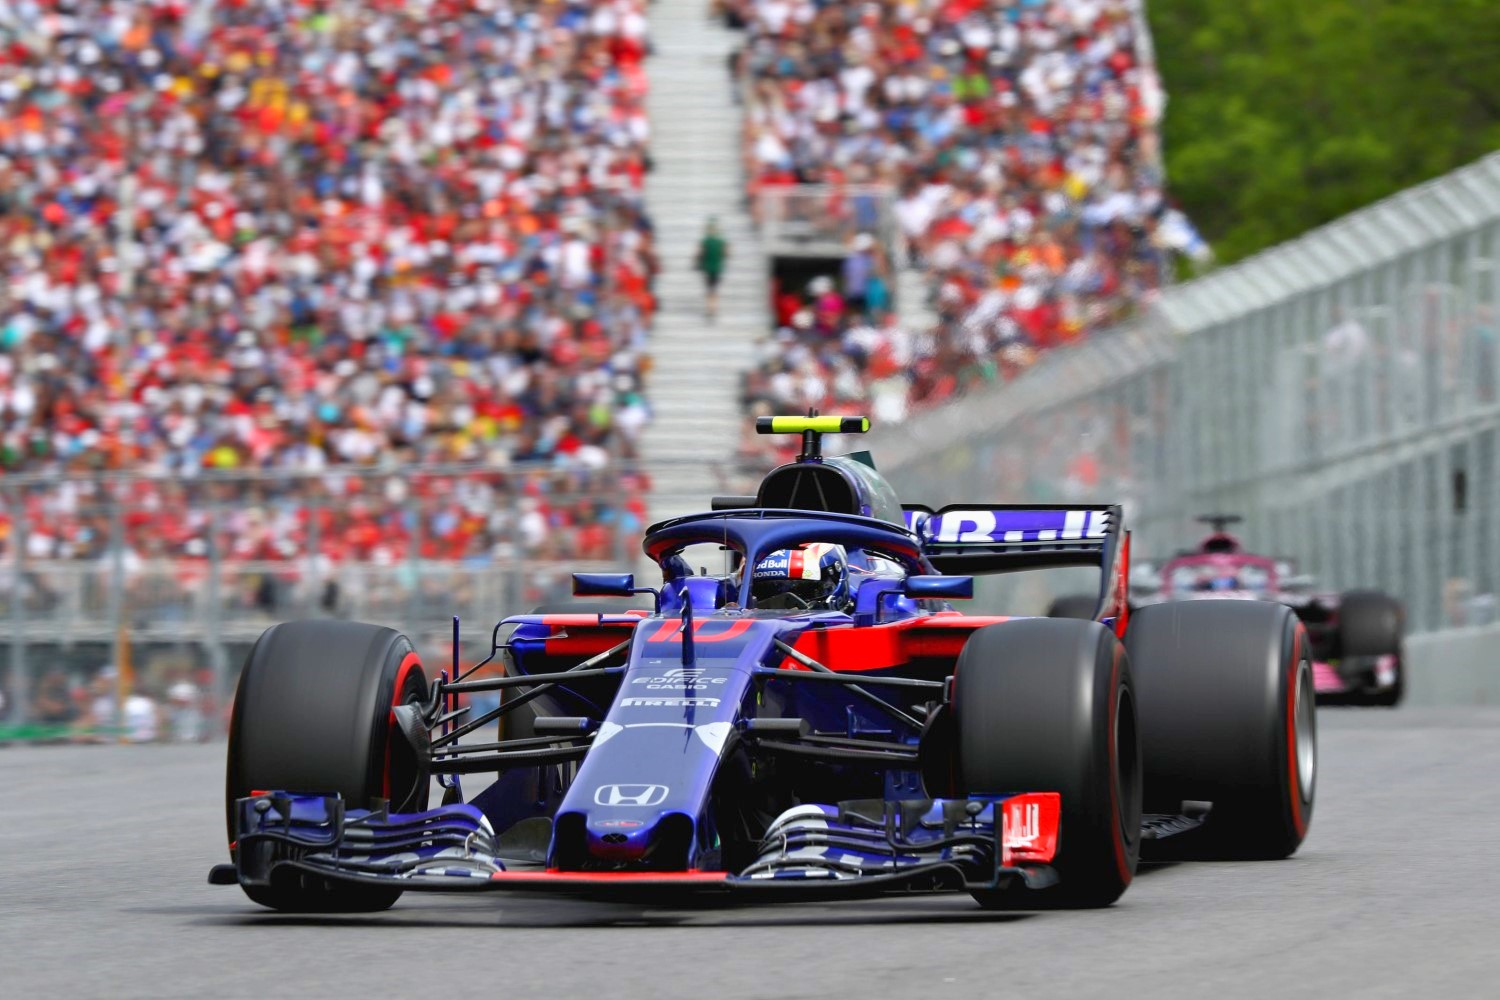 Toro Rosso to have equal engines